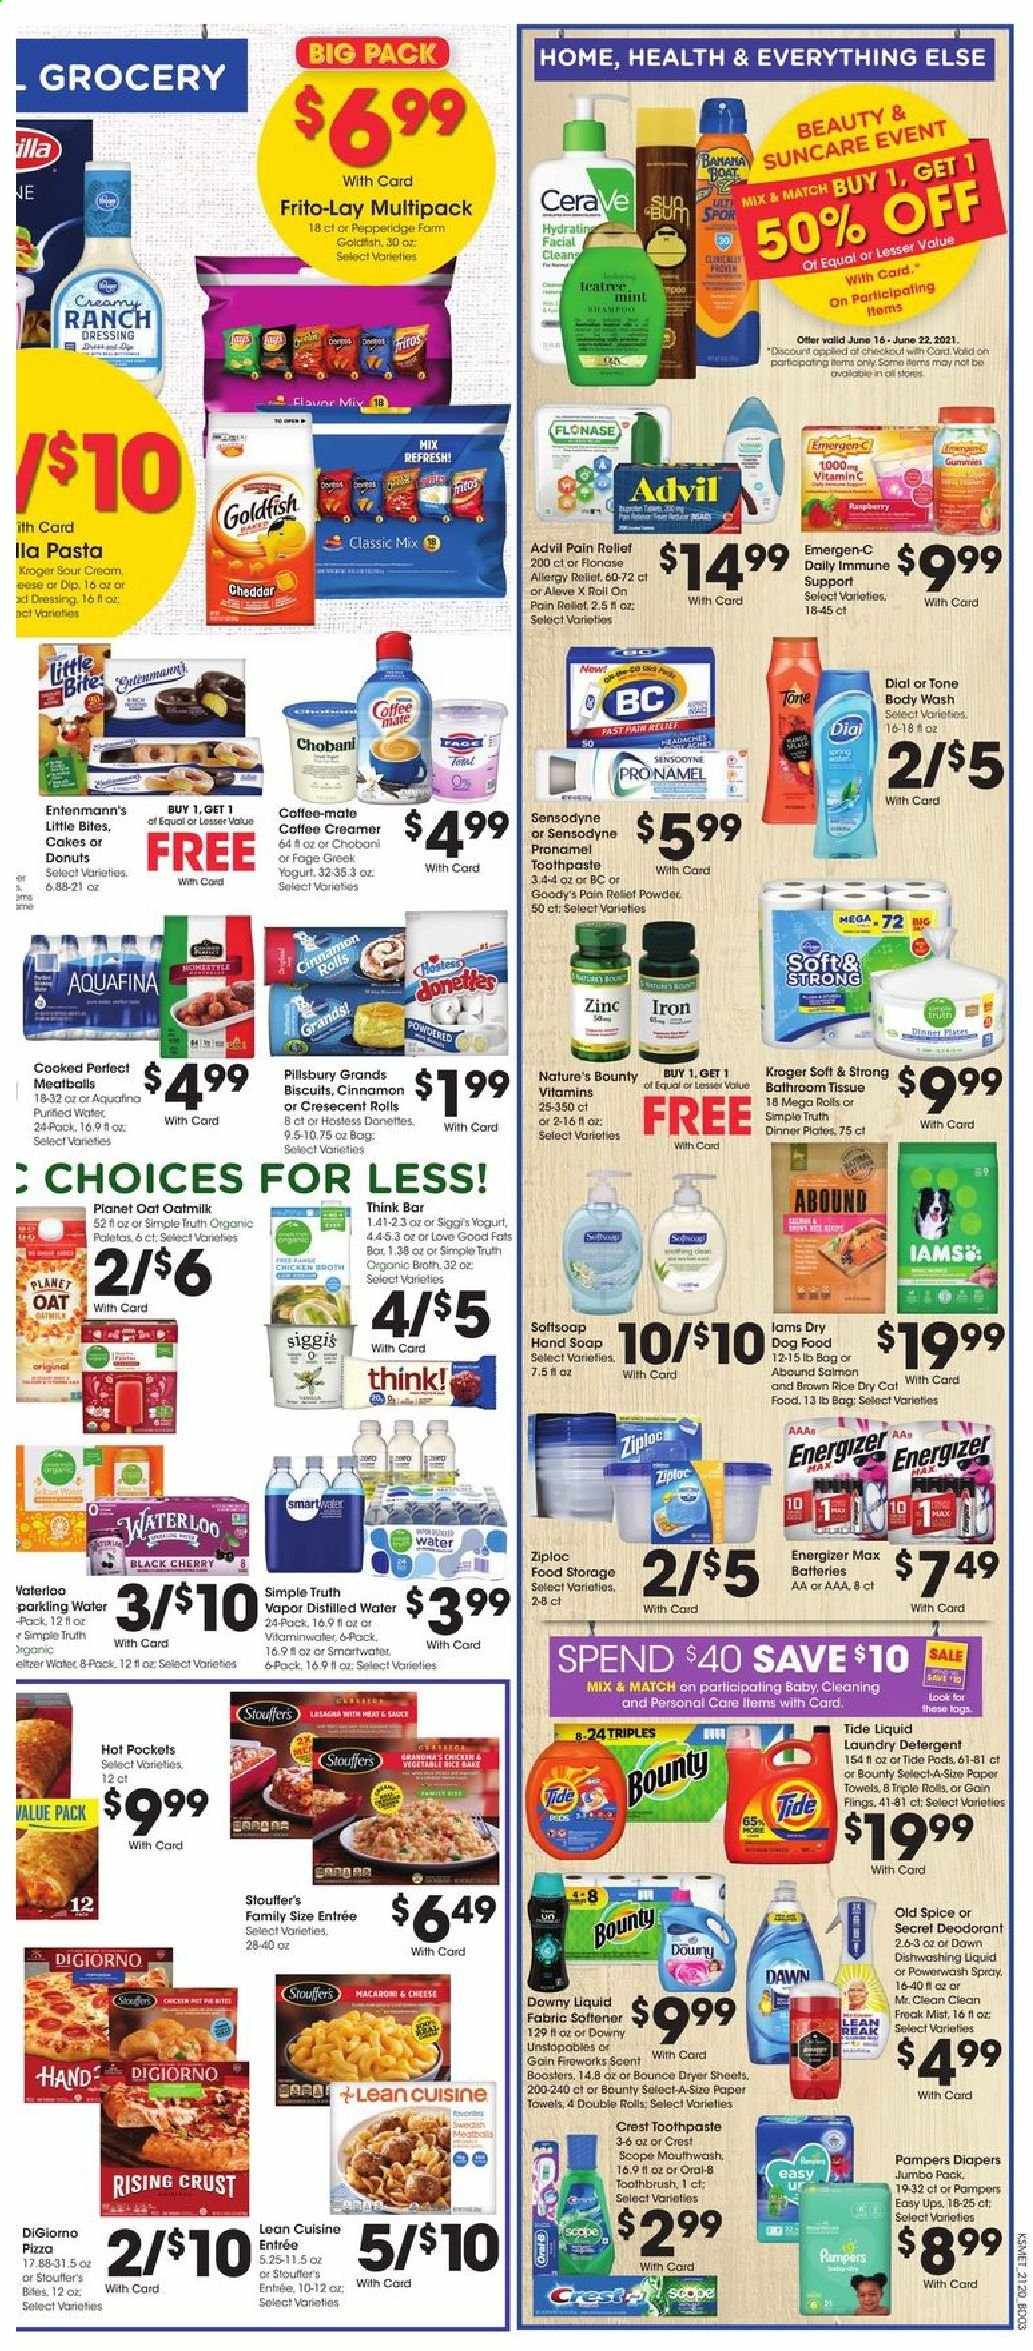 thumbnail - King Soopers Flyer - 06/16/2021 - 06/22/2021 - Sales products - cake, donut, Entenmann's, cherries, hot pocket, pizza, pasta, Pillsbury, Lean Cuisine, greek yoghurt, yoghurt, Chobani, Coffee-Mate, oat milk, sour cream, creamer, ranch dressing, dip, Stouffer's, biscuit, Little Bites, Goldfish, Frito-Lay, broth, rice, spice, cinnamon, dressing, Aquafina, Smartwater, Pampers, nappies, bath tissue, kitchen towels, paper towels, detergent, Gain, Tide, fabric softener, laundry detergent, Bounce, Downy Laundry, dishwashing liquid, body wash, Softsoap, Old Spice, Dial, toothbrush, toothpaste, Sensodyne, mouthwash, Crest, anti-perspirant, roll-on, deodorant, Ziploc, battery, Energizer, animal food, dog food, Iams, iron, scope, boat, distilled water, pain relief, Aleve, Nature's Bounty, vitamin c, zinc, Advil Rapid, Emergen-C. Page 5.